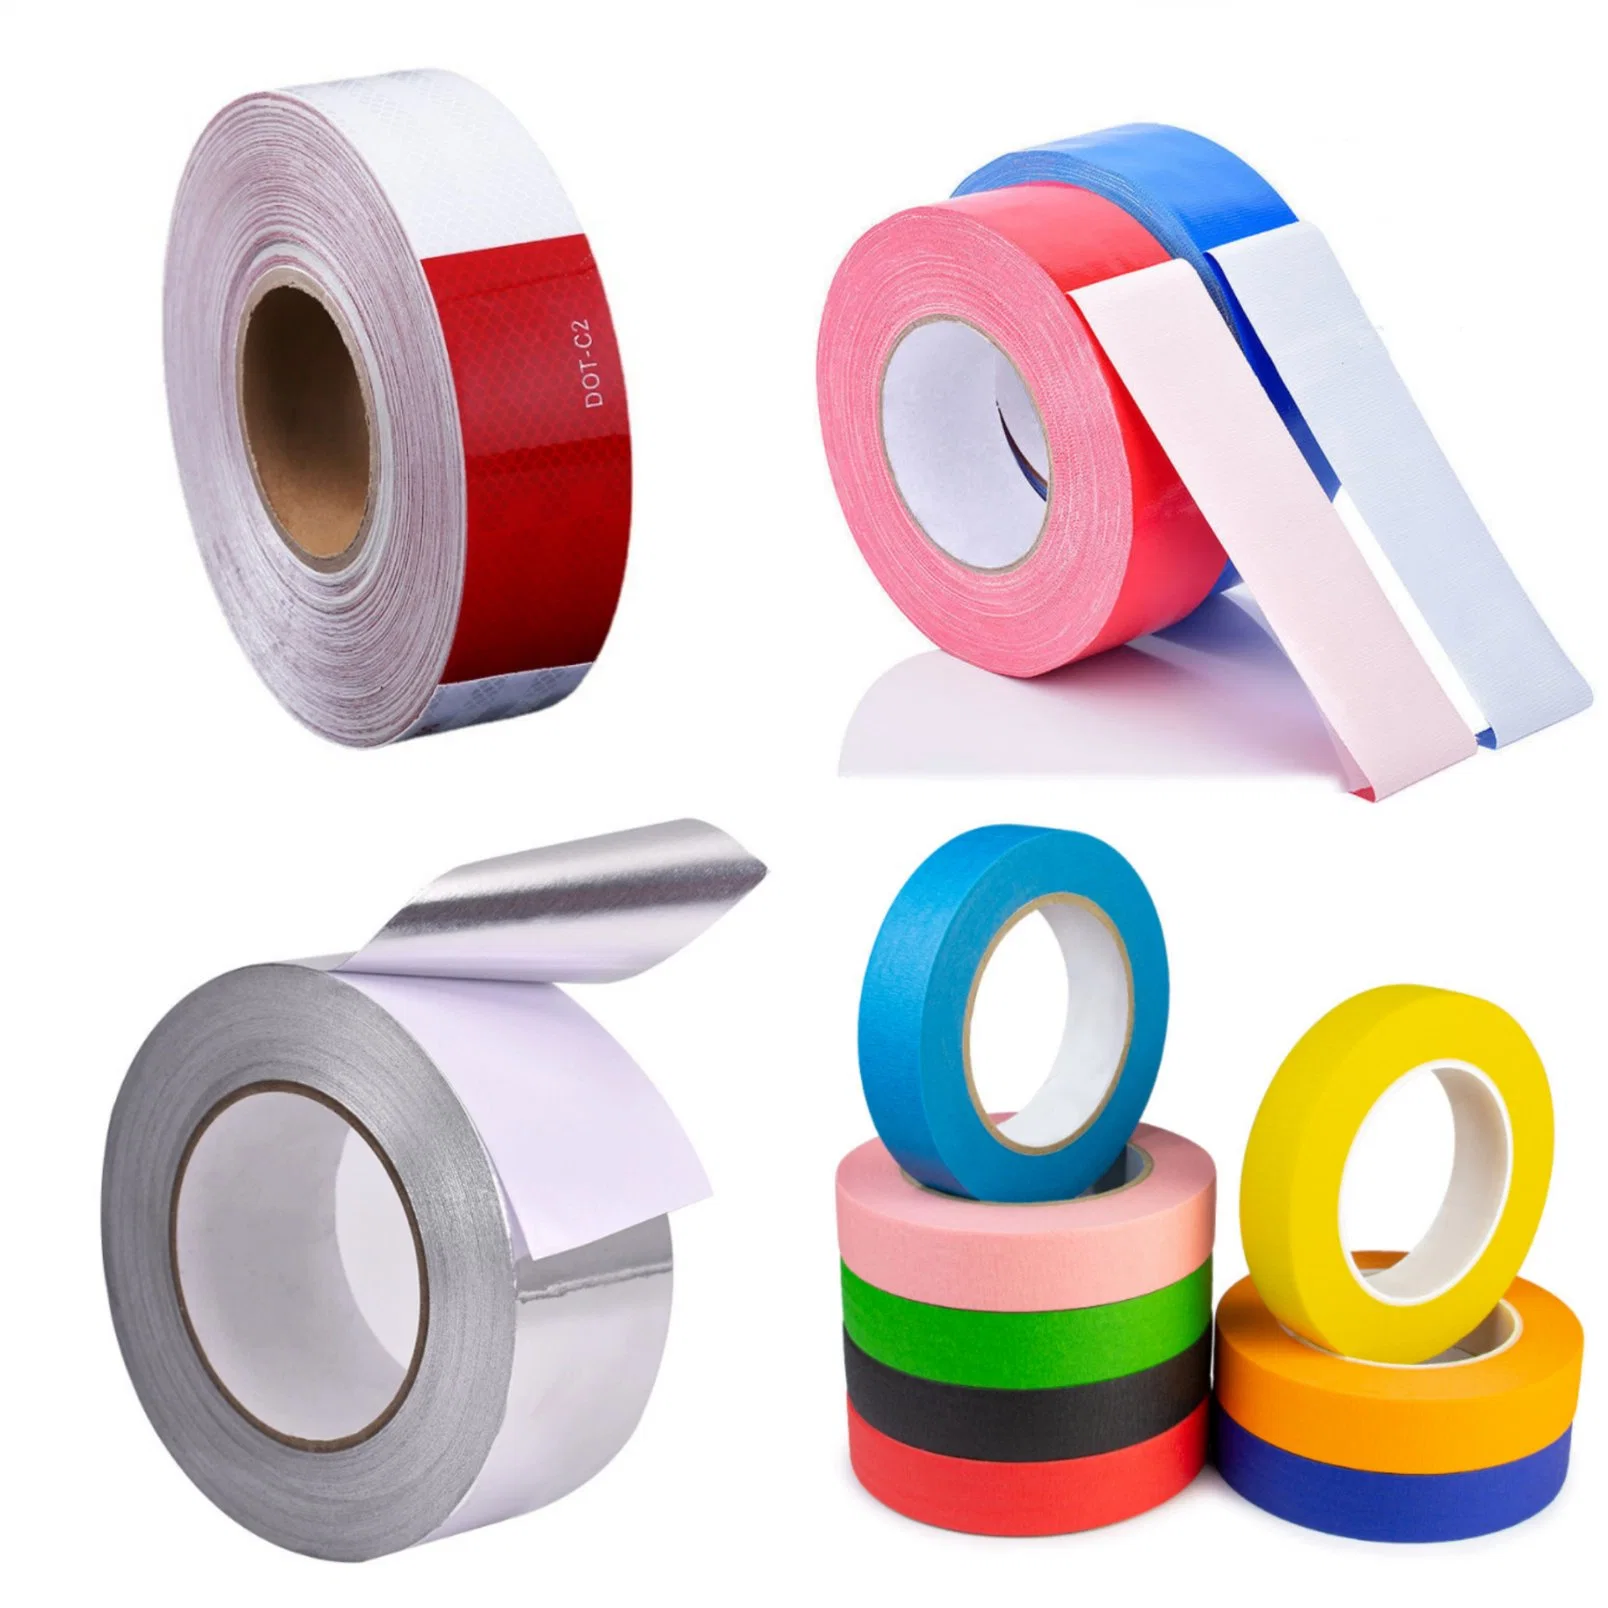 Adhesive Tape Like Kraft /Masking /Cloth Duct / Aluminum Foil / Reflective Tape and Focuses on Adhesive Tape 10+ Years